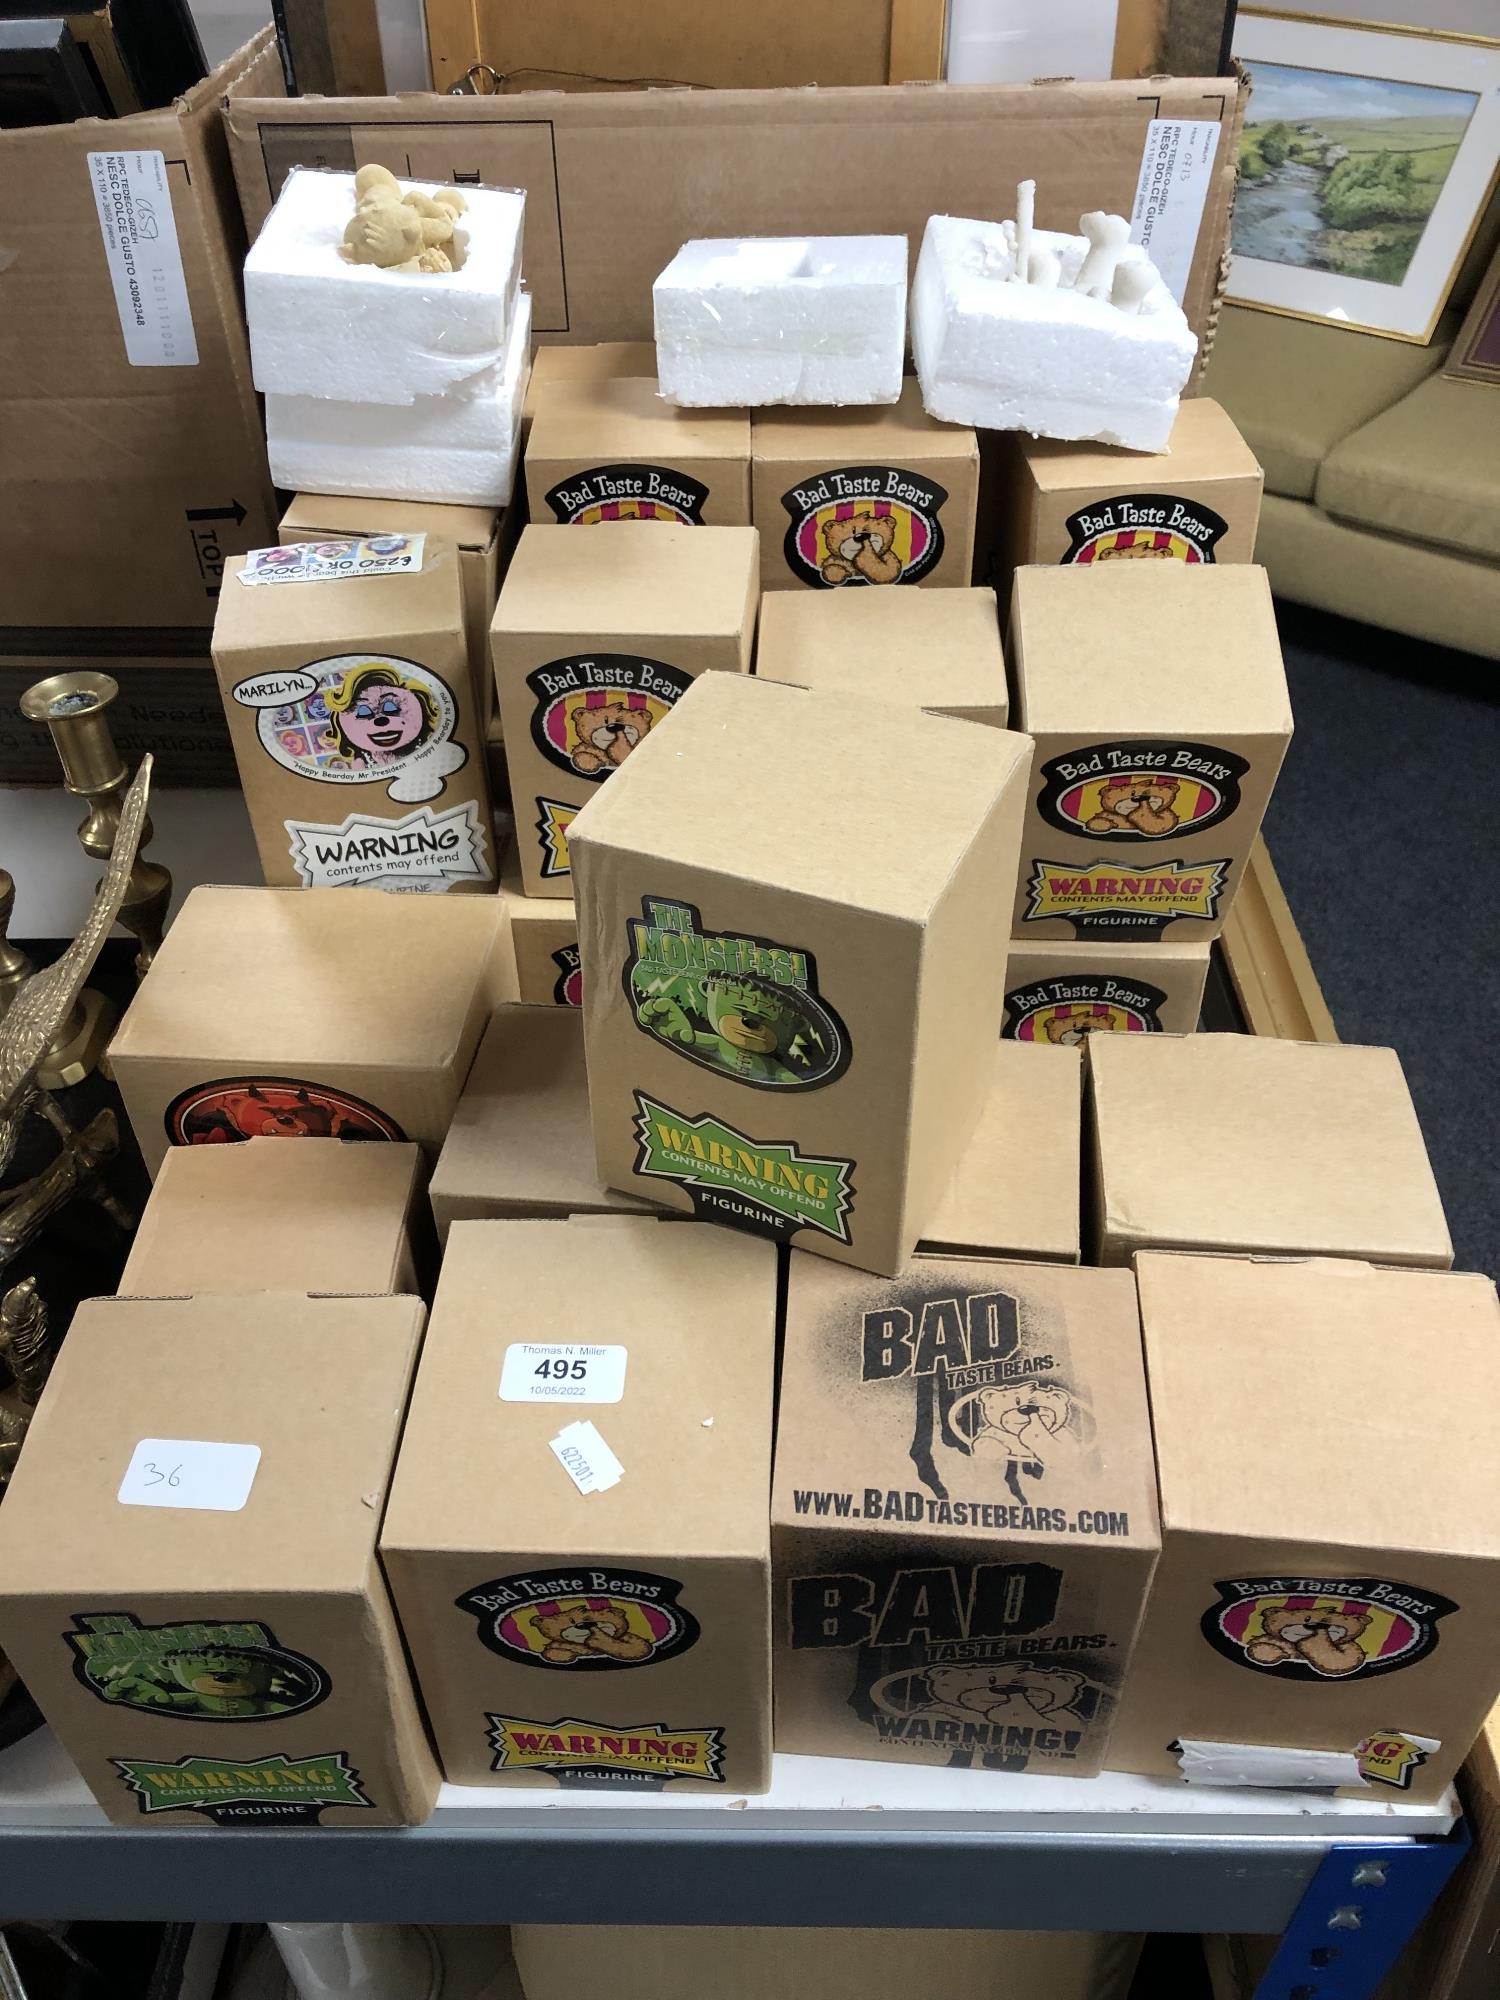 A large collection of Bad Taste Bear figures in boxes.